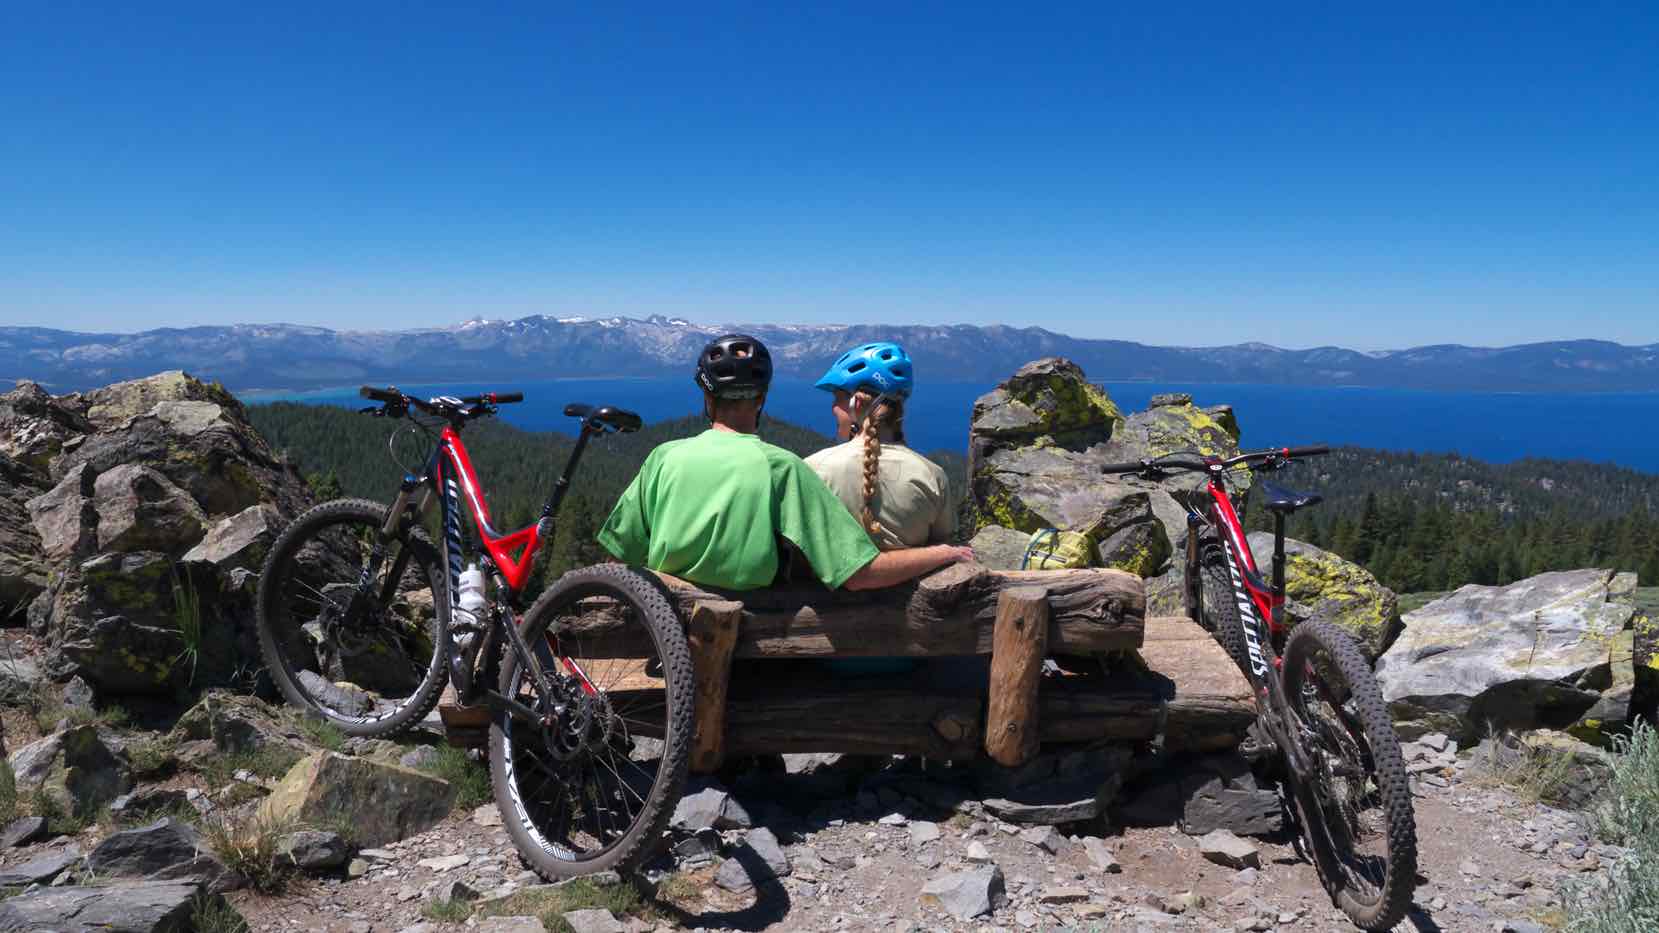 The Top 6 Mountain Bike Trails in South Lake Tahoe